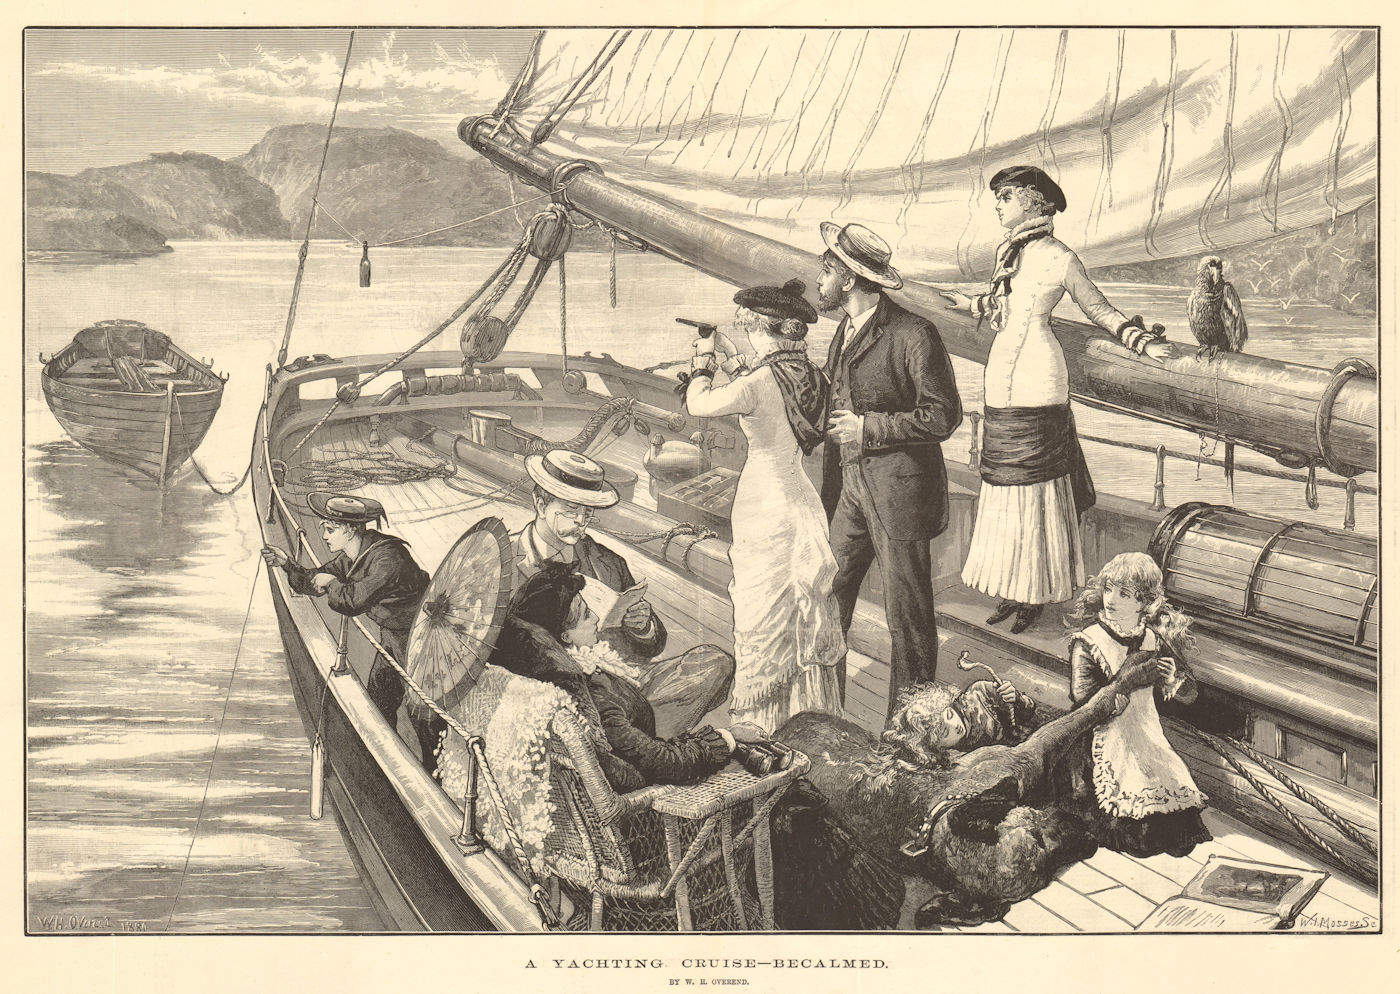 Associate Product "A yachting cruise - becalmed", by W. H. Overend. Society. Sailing 1880